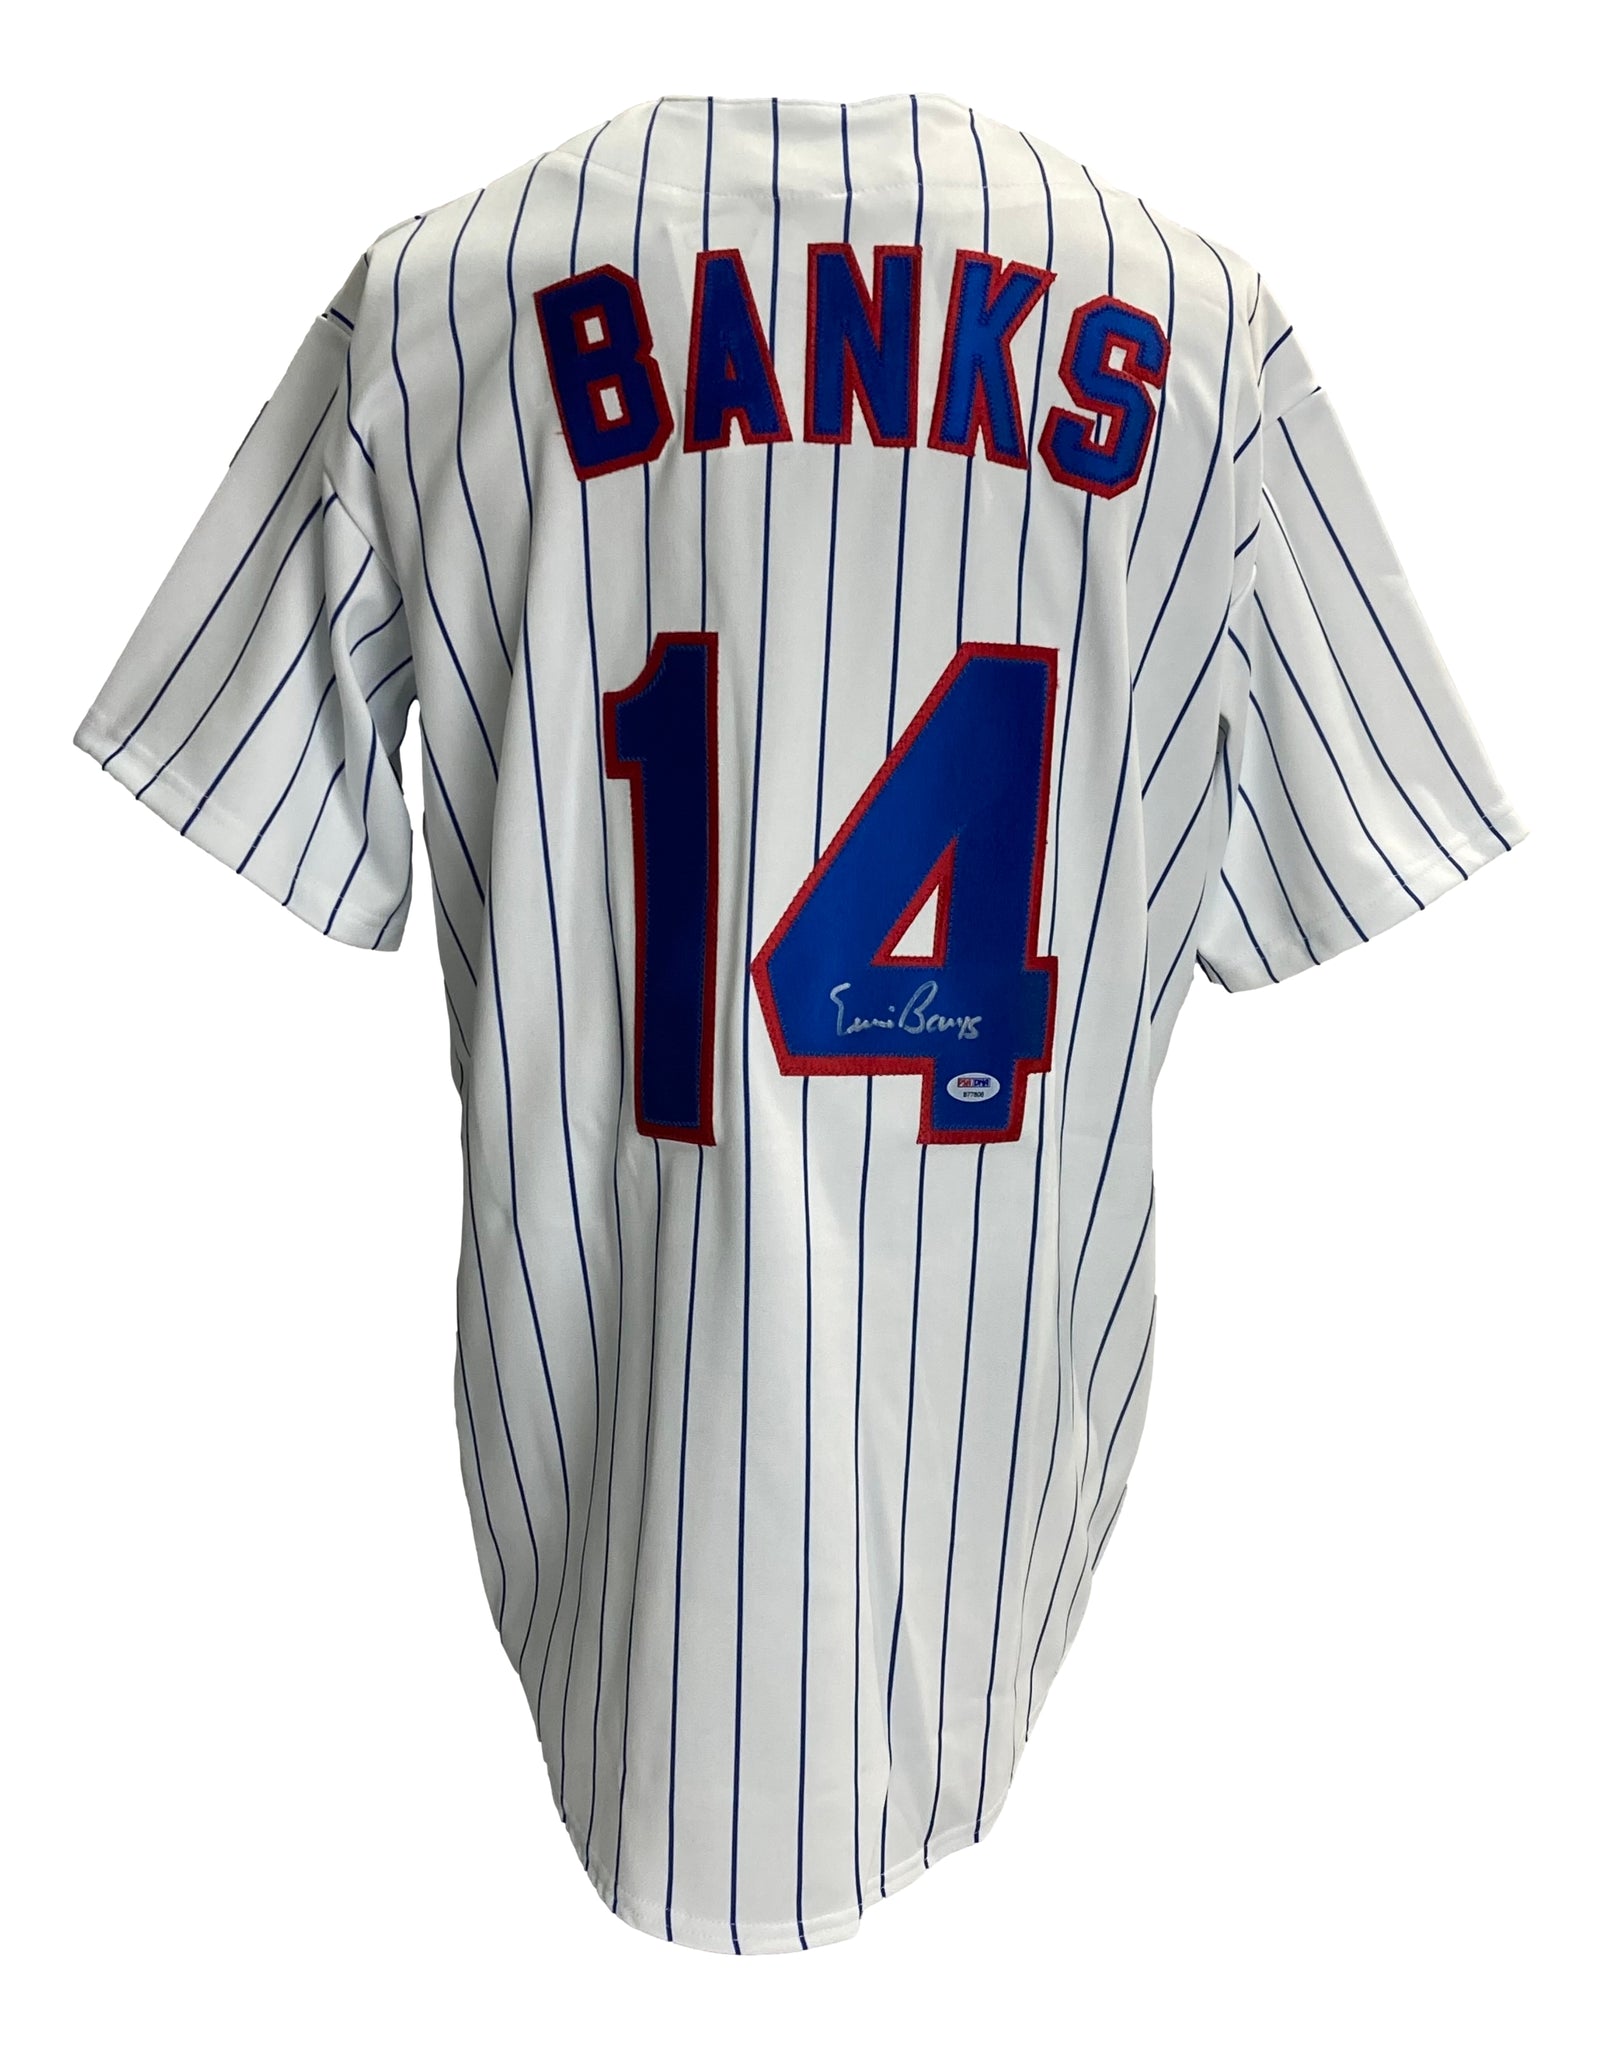 Ernie Banks Framed Cubs Jersey Display With Cut Signature and Pins